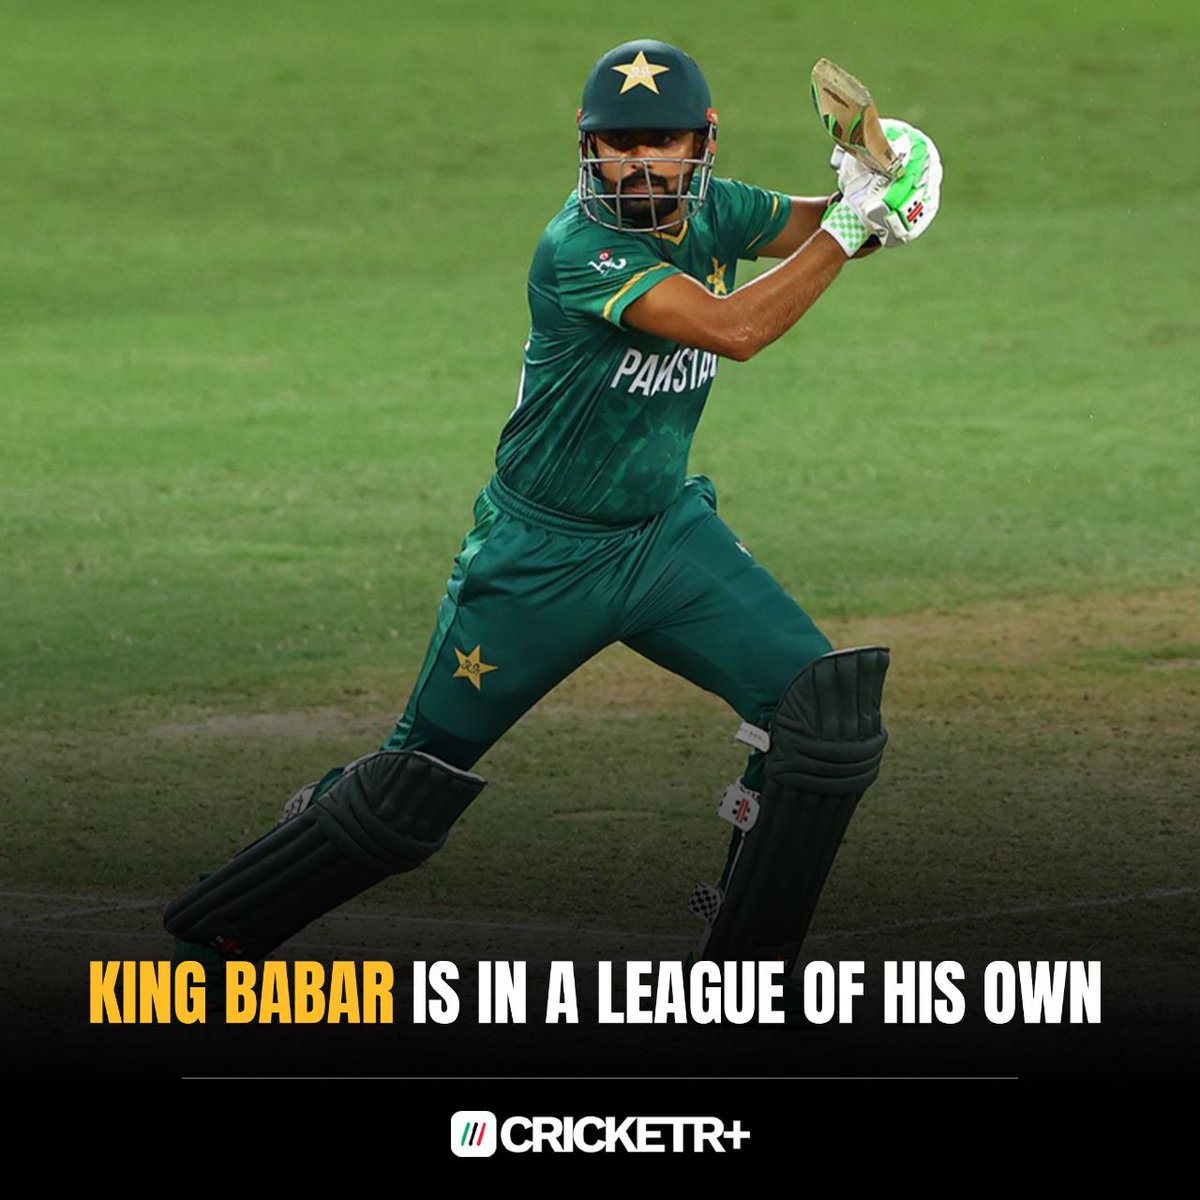 .@babarazam258 dominating ICC WORLD CUP SUPER LEAGUE as a batter, the Pride of Pakistan has the best average, best strike-rate, most 100s, most fifties and most fours under his name

#BabarAzam #BabarAzam𓃵 #CricketR #News #WorldCup #ICC